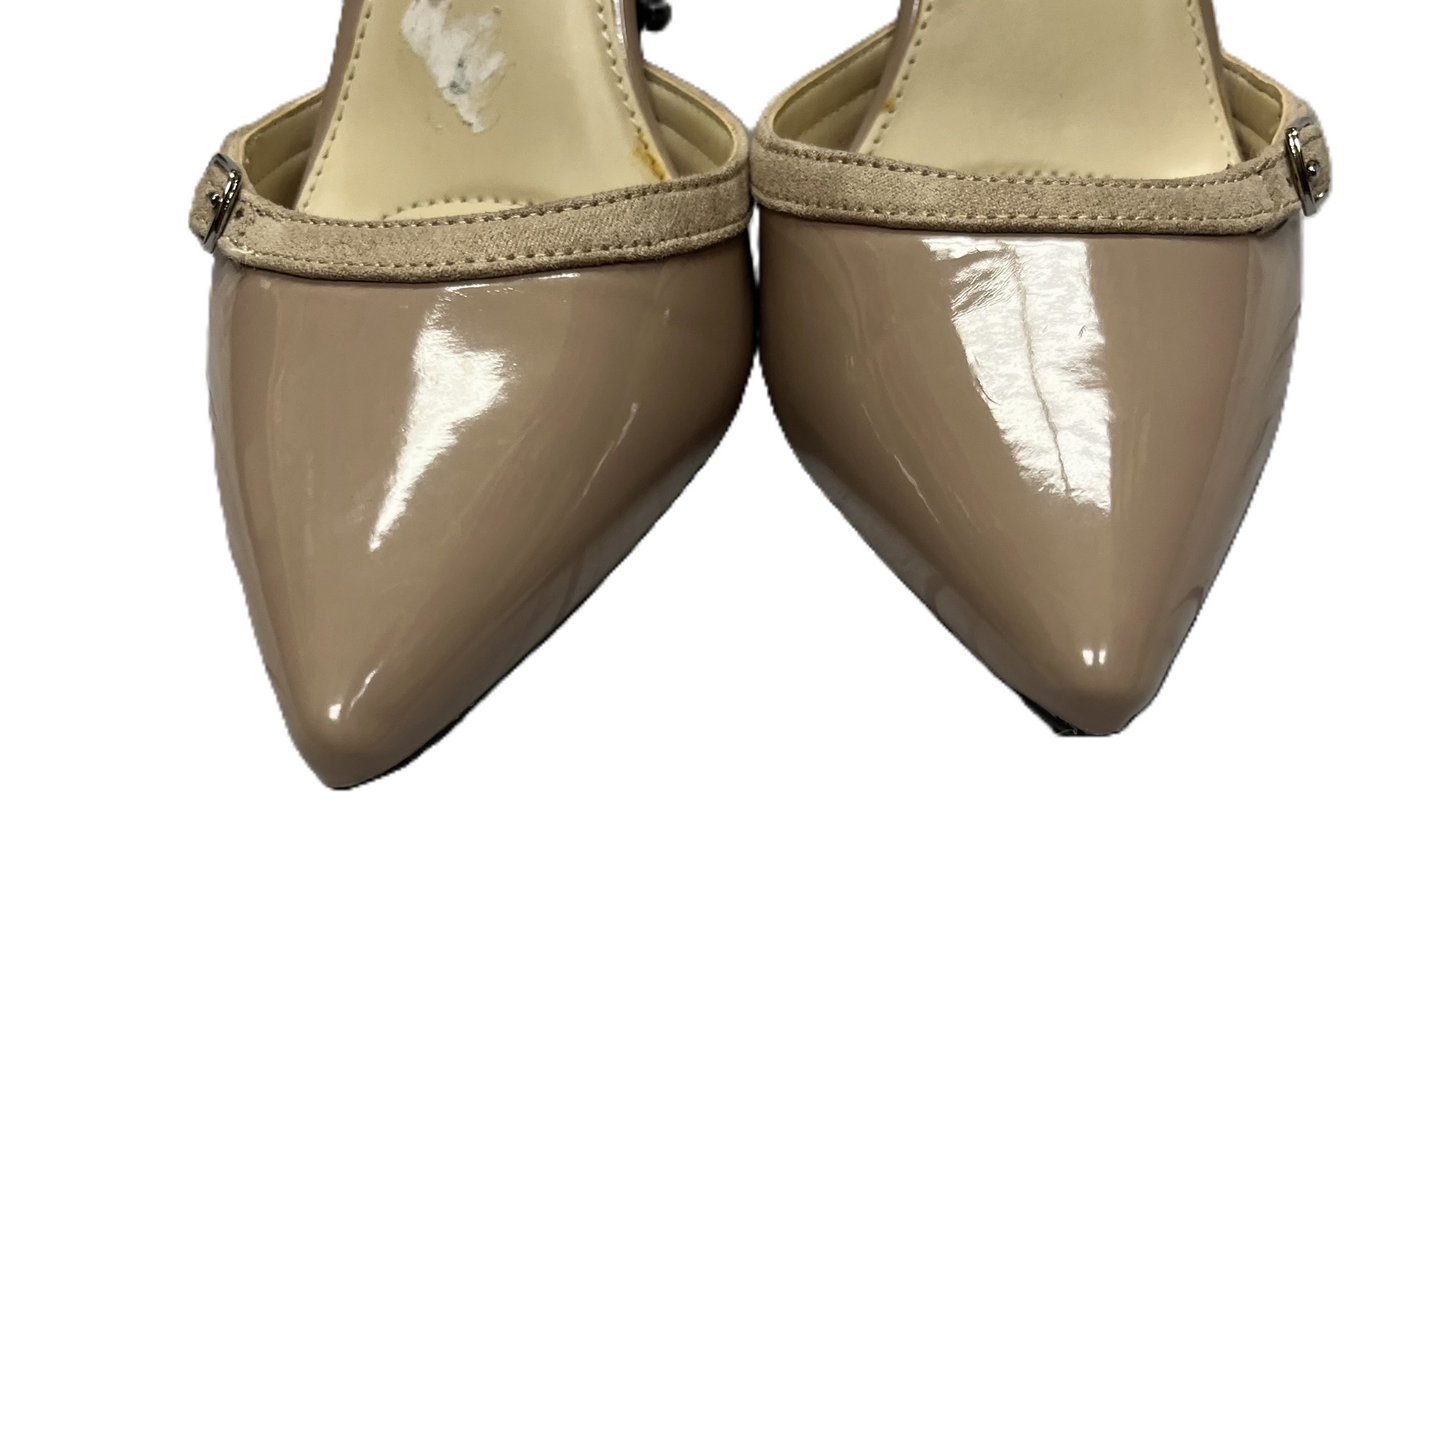 Taupe Shoes Heels Kitten By Jones New York, Size: 7